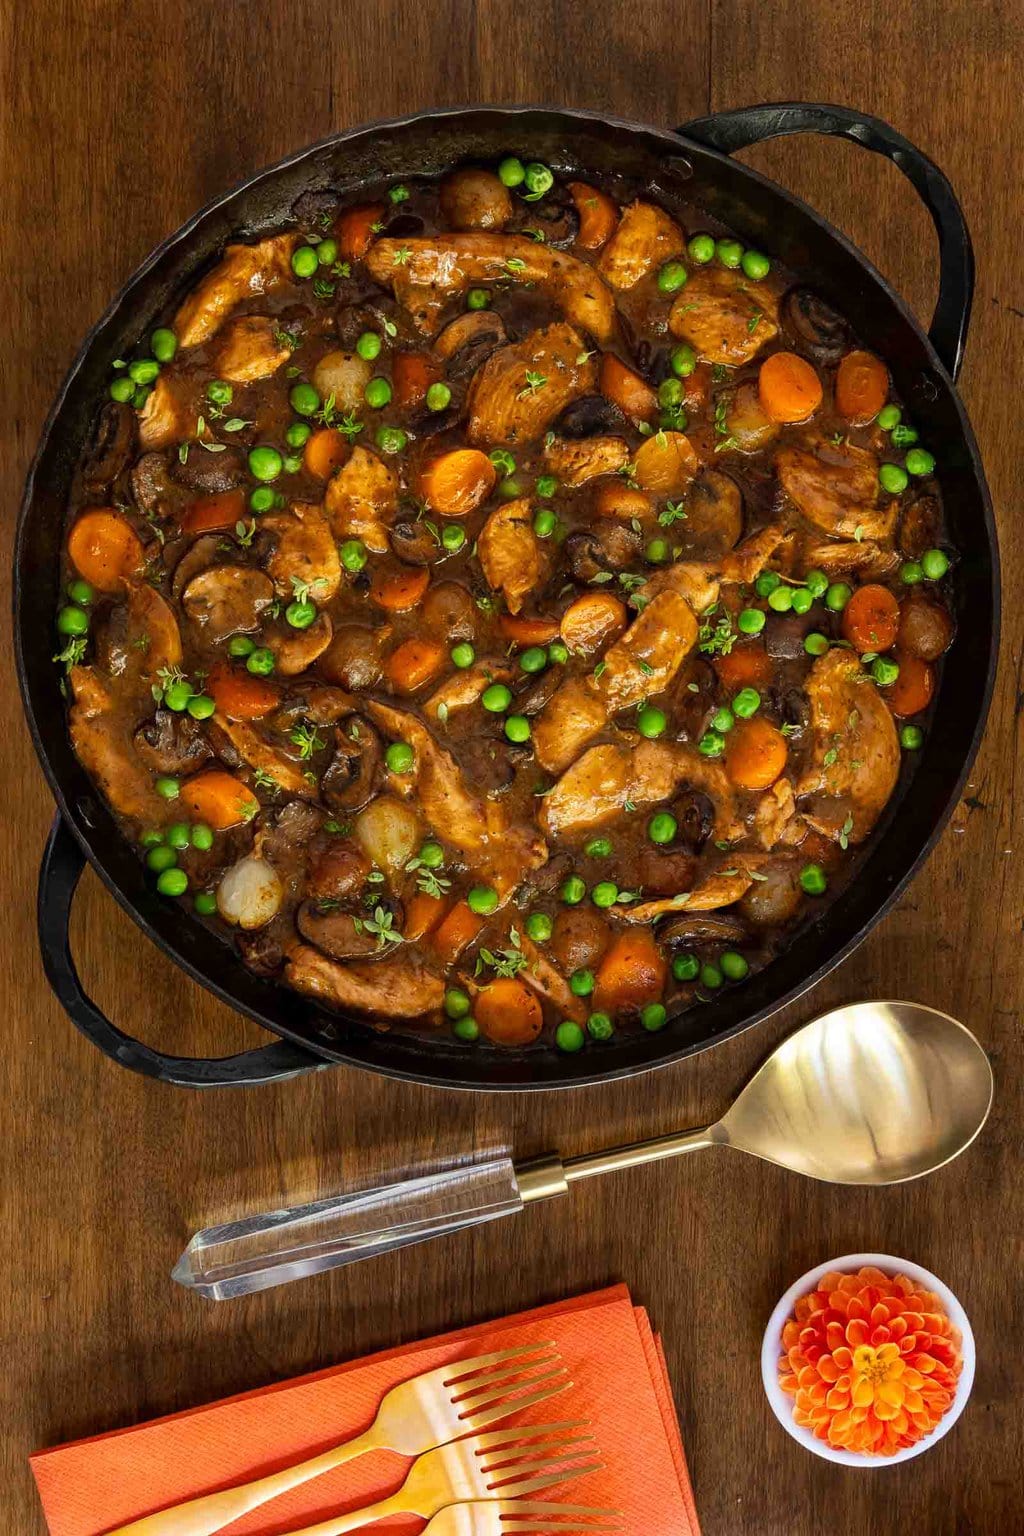 Vertical overhead photo of a black cast iron skillet of Easy, Make-Ahead Parisian Coq au Vin on a wood table.